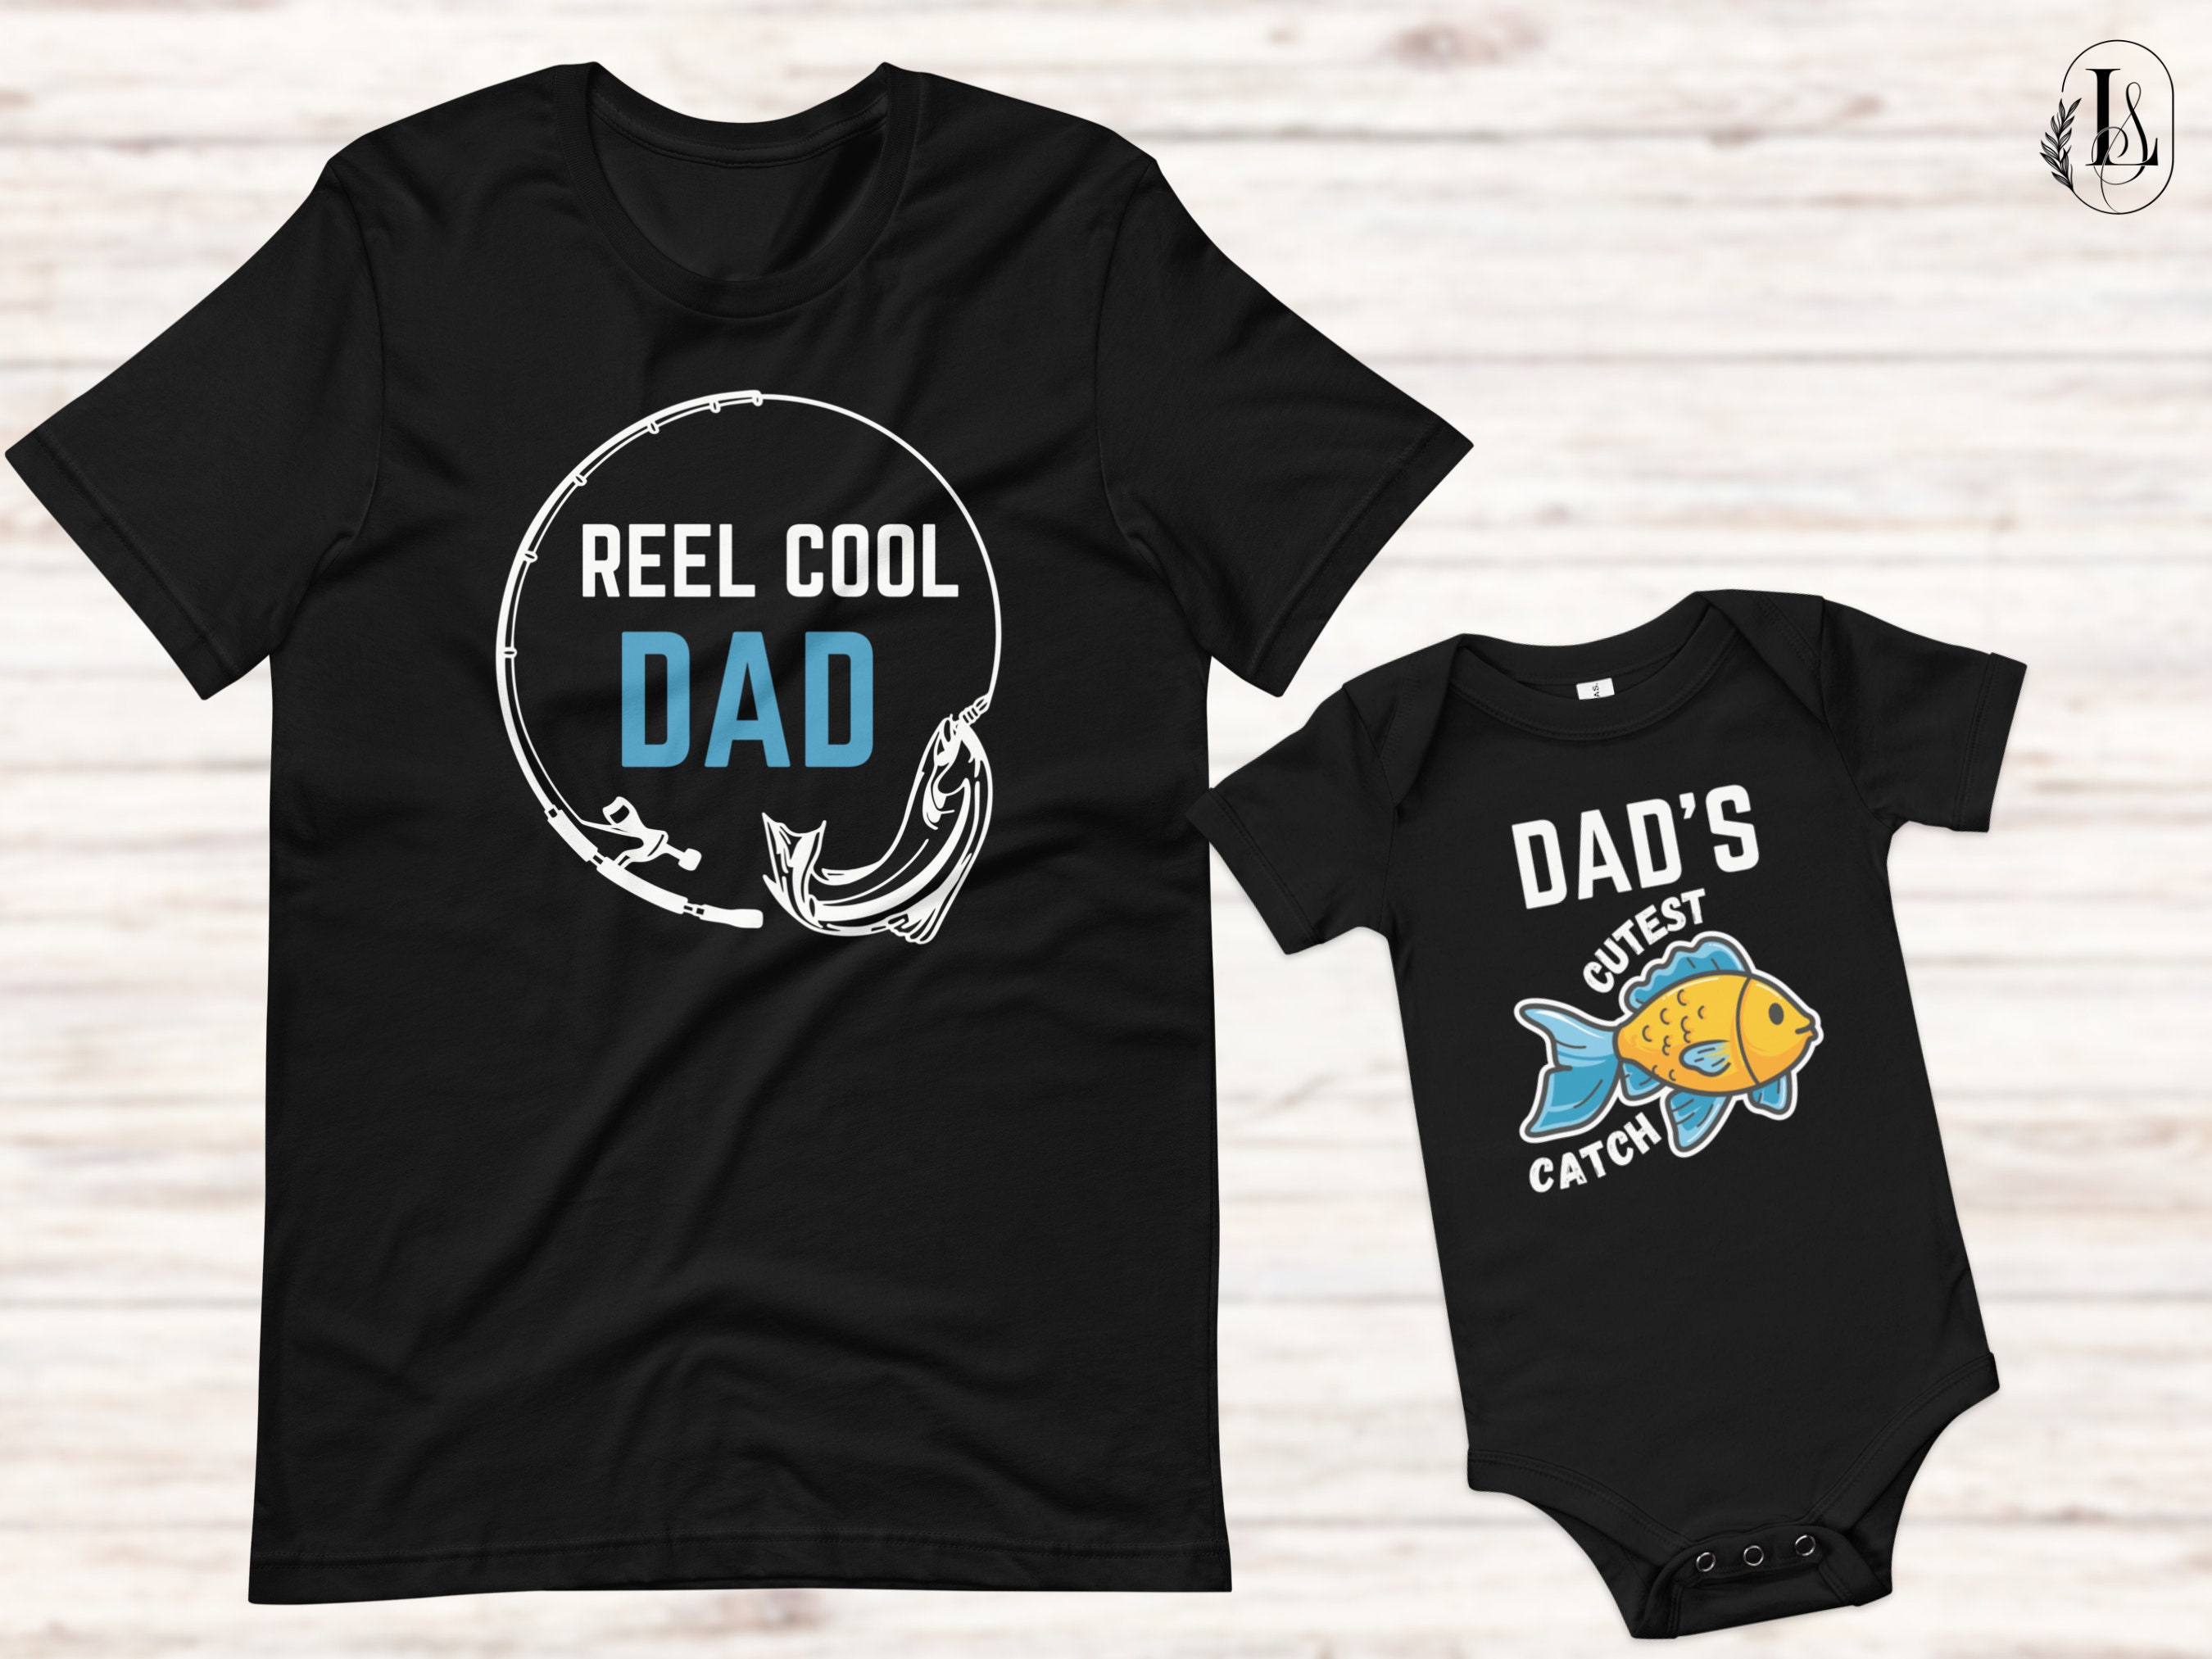 Dad and Baby Matching Shirts, Fishing Father Son Matching Shirts, Fathers Day Gift from Son, Father's Day Baby Gift, Dad and Me Shirts Gift